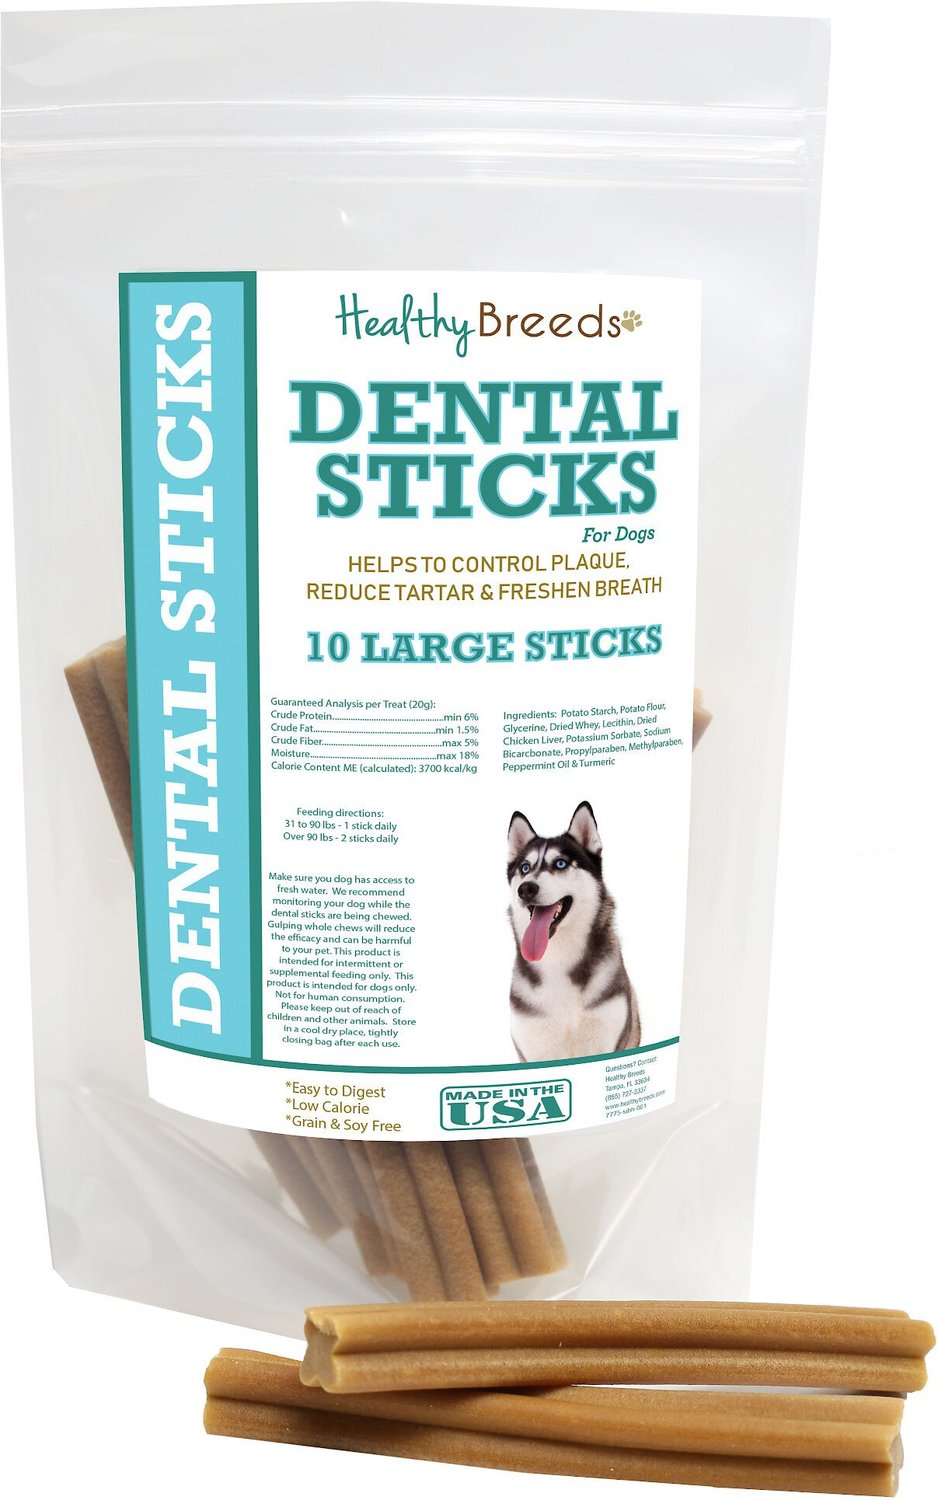 healthy low fat treats for dogs